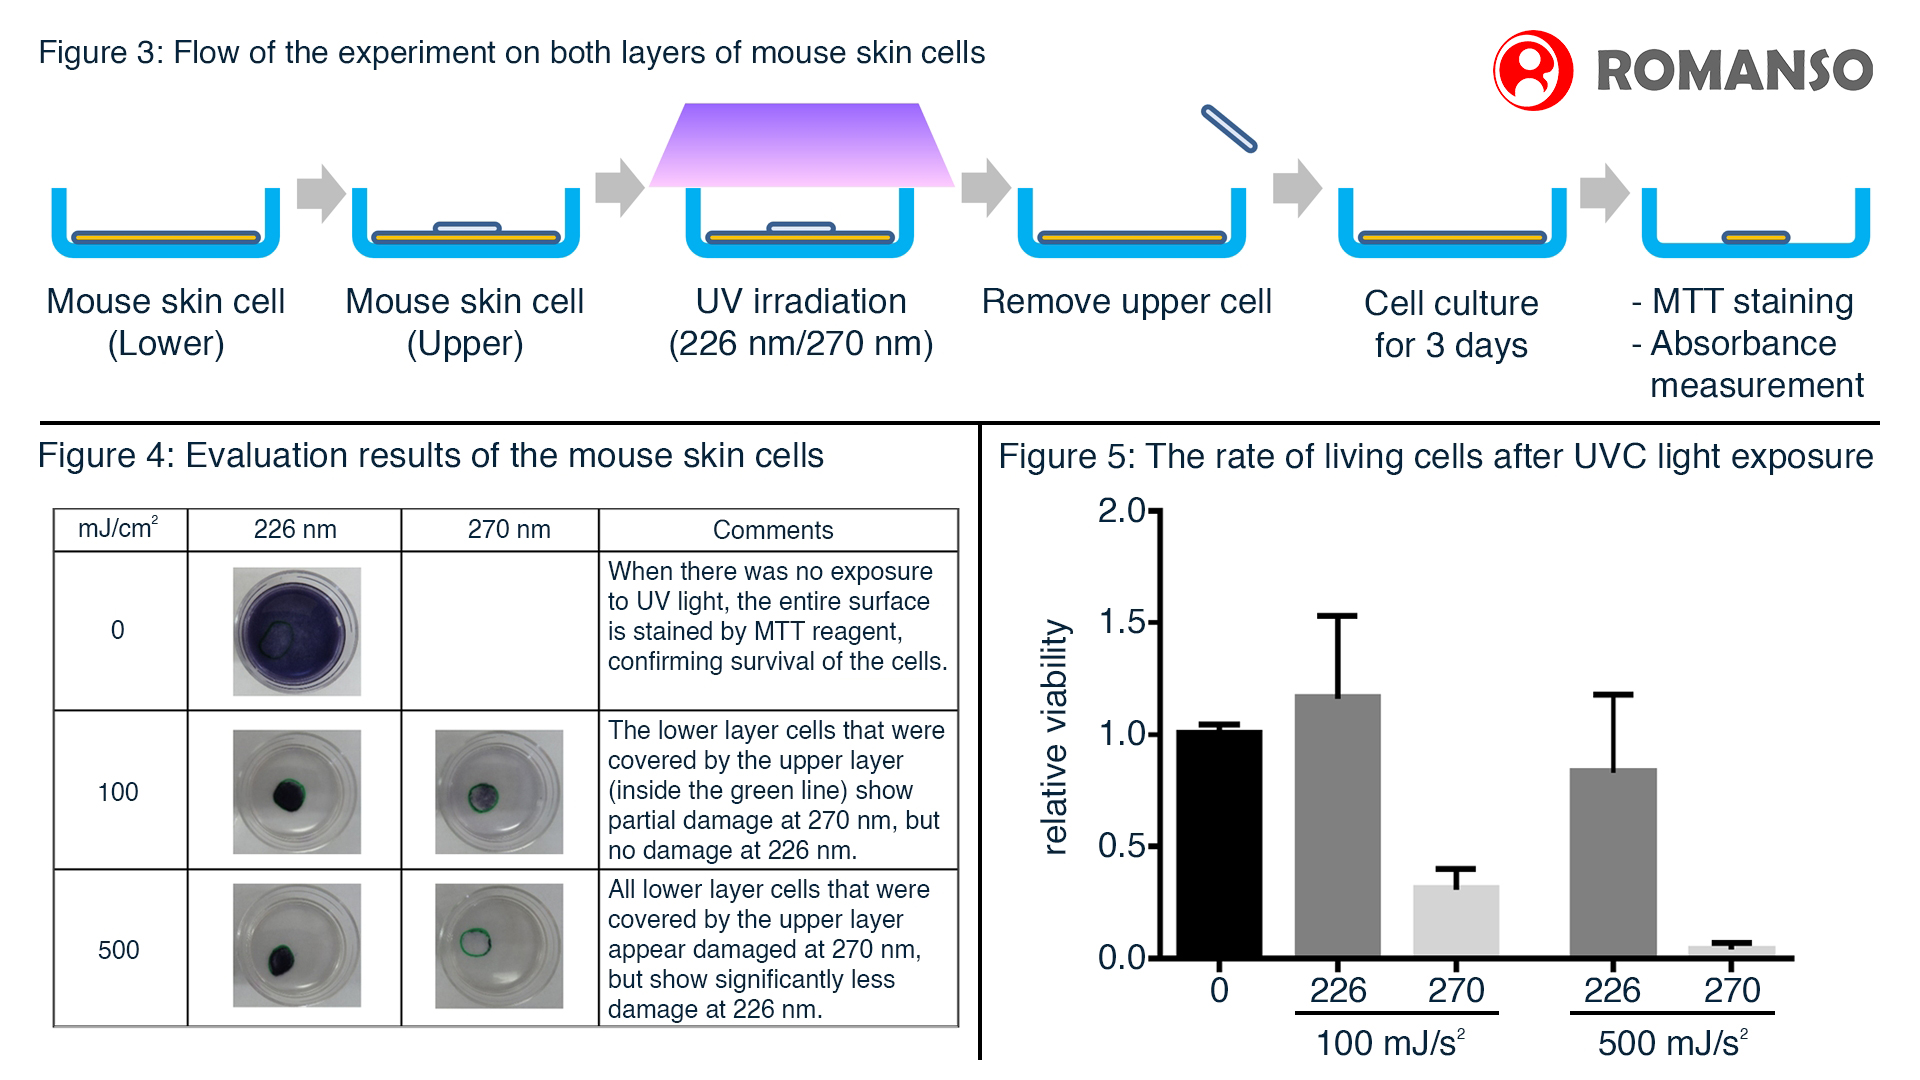 Studies Have Shown to Confirm 226 nm UVC LED Efficacy Against SARS-CoV-2 and Verify Reduced Effect on Animal Skin Cells